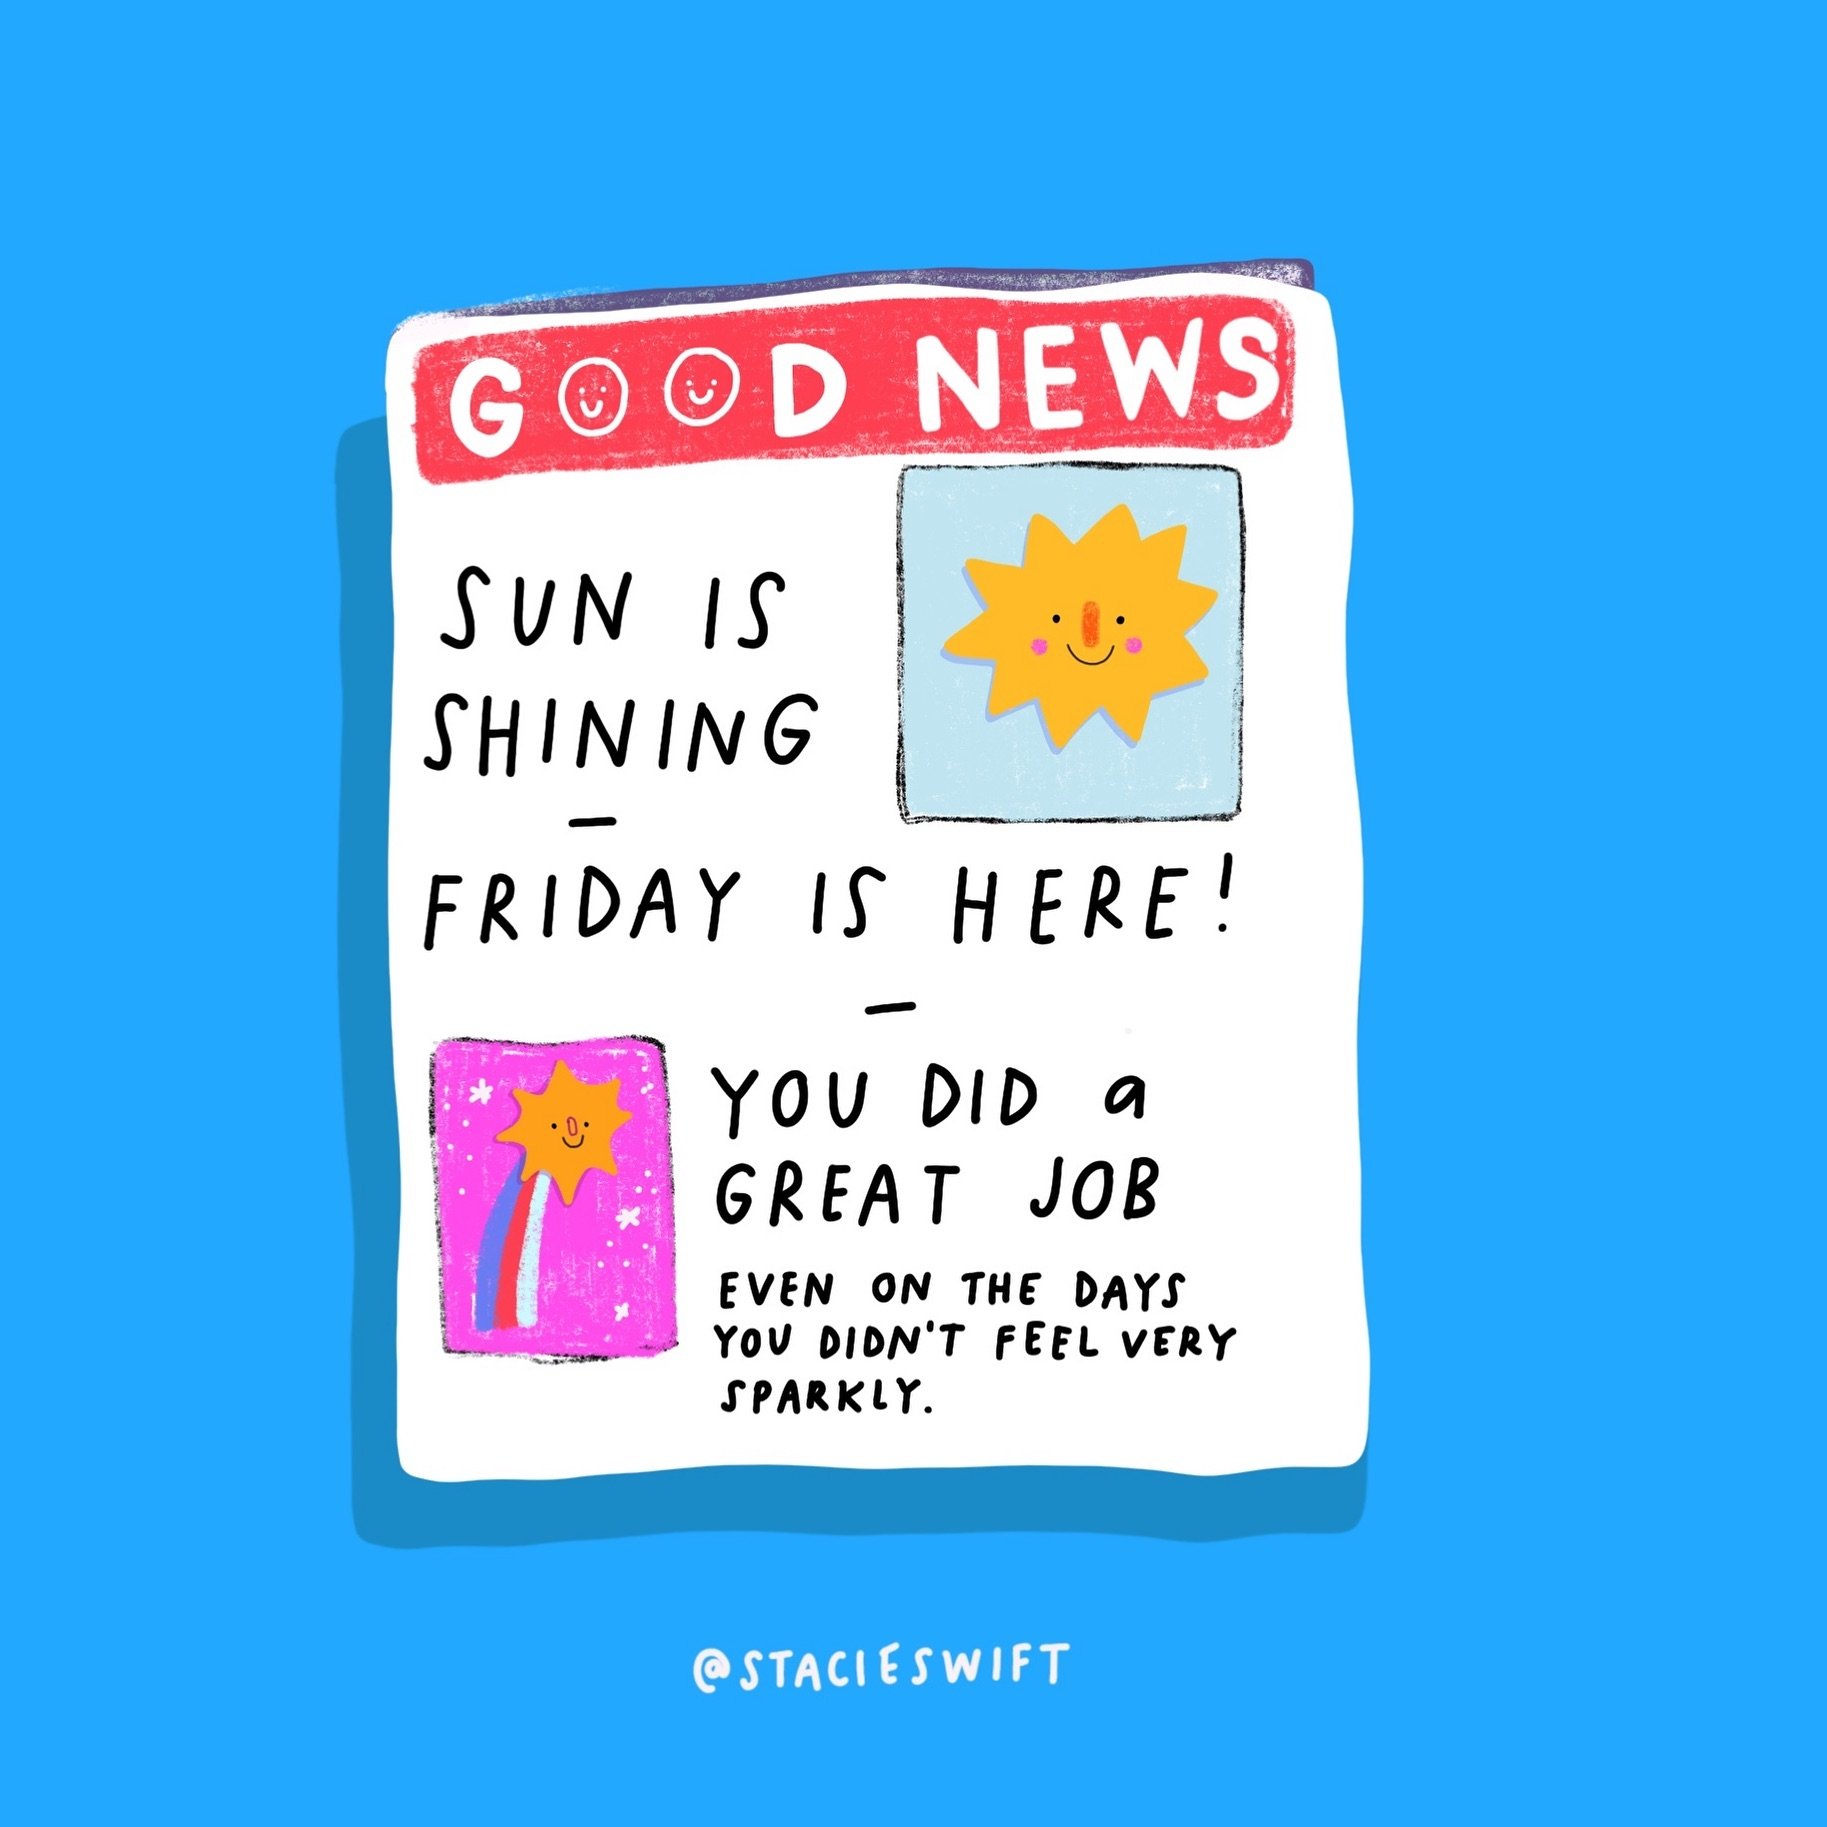 Good News - we got through the week!

It&rsquo;s been a mixed bag here, I&rsquo;m very glad for a sunny weekend ahead.

I hope the sun is shining for you too. 
Happy Friday 🌞